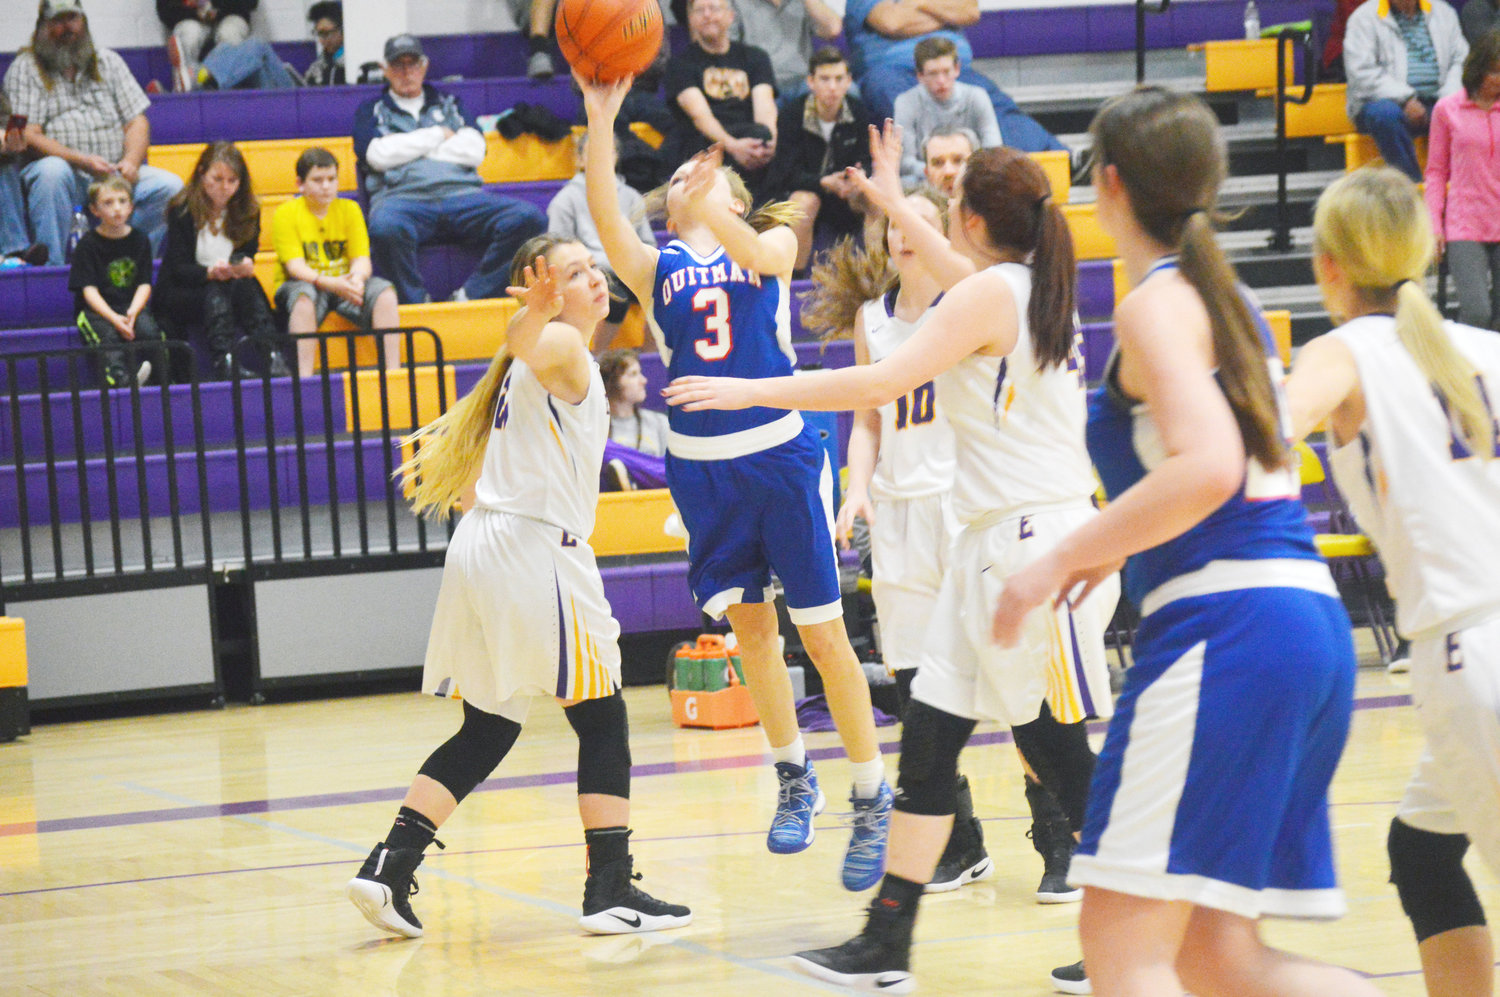 Quitman’s Brittany Walls goes up for two points at Edgewood last Tuesday night. (Photo by Larry Tucker)